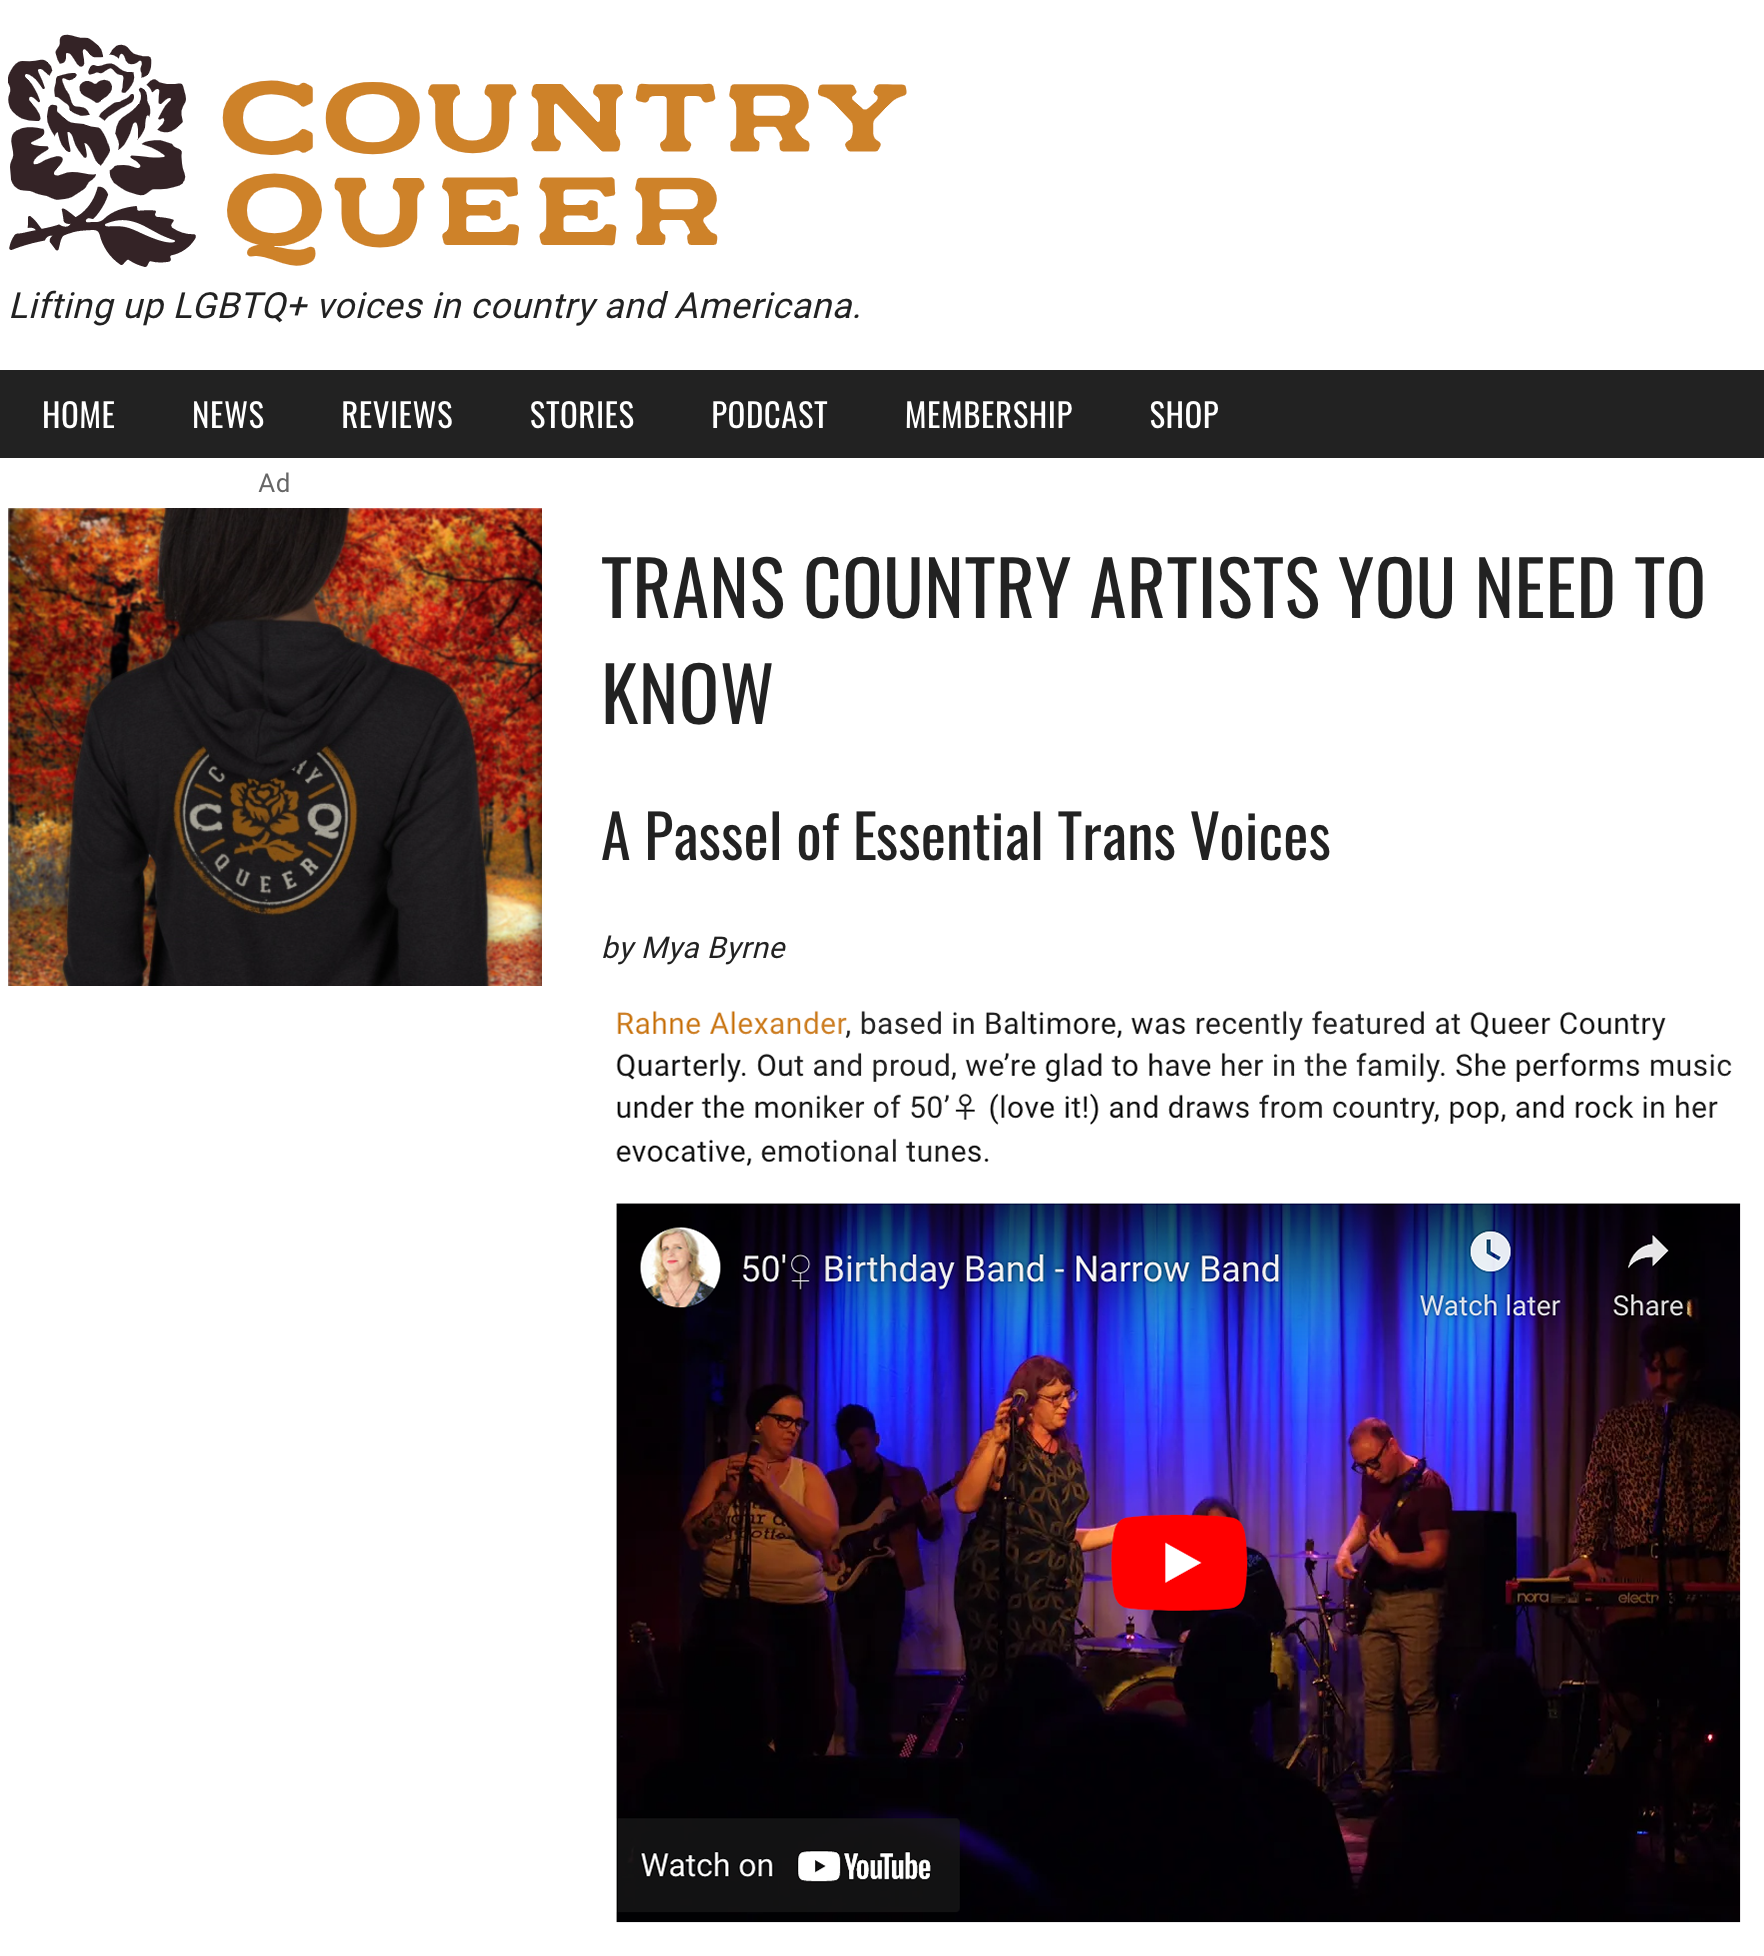 Country Queer named me among Trans Country Artists You Need To Know